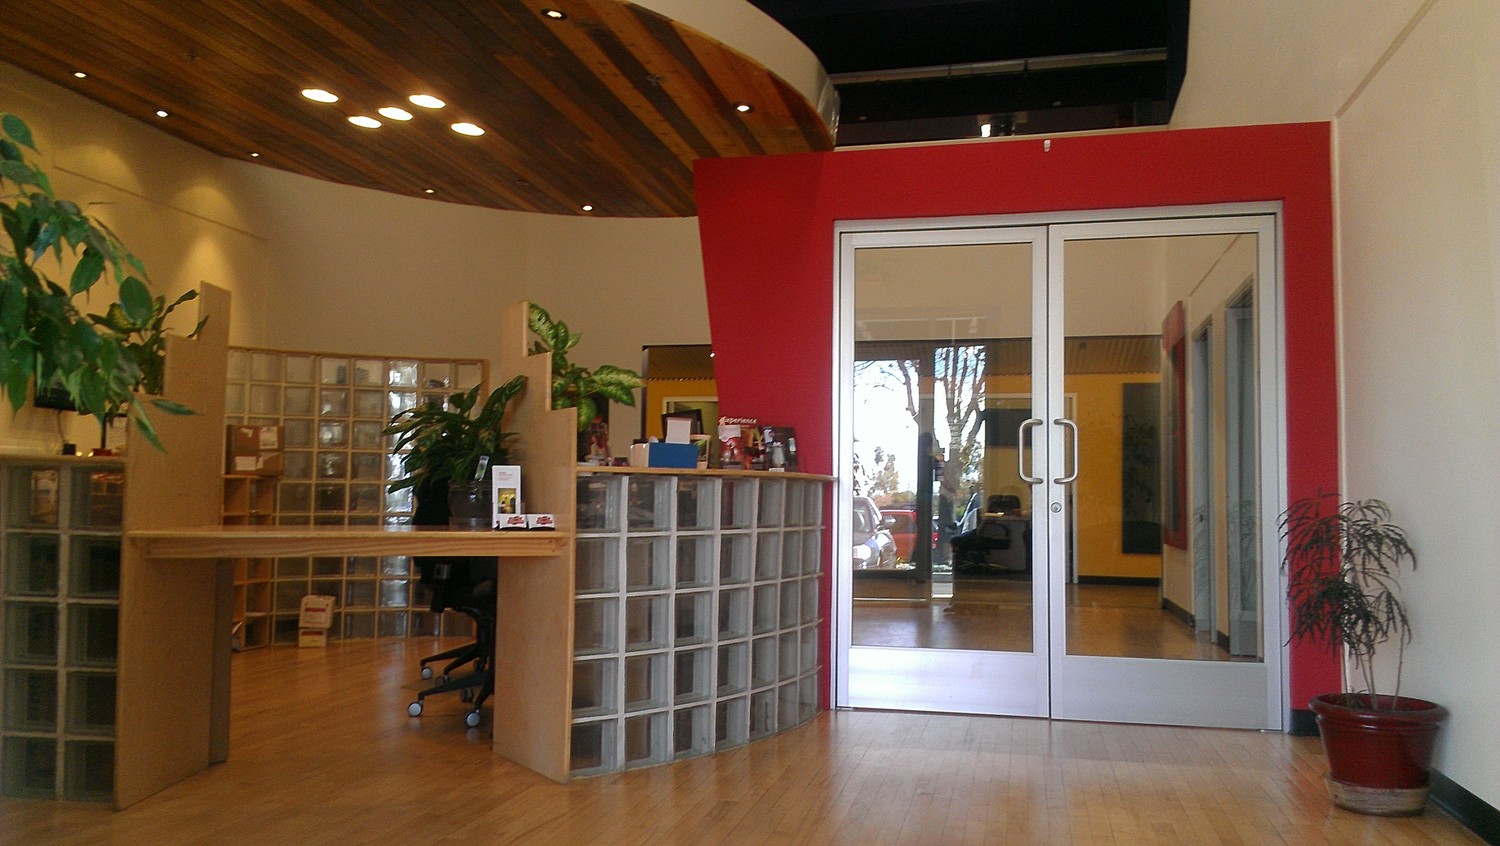 Gallery Photo of Building lobby